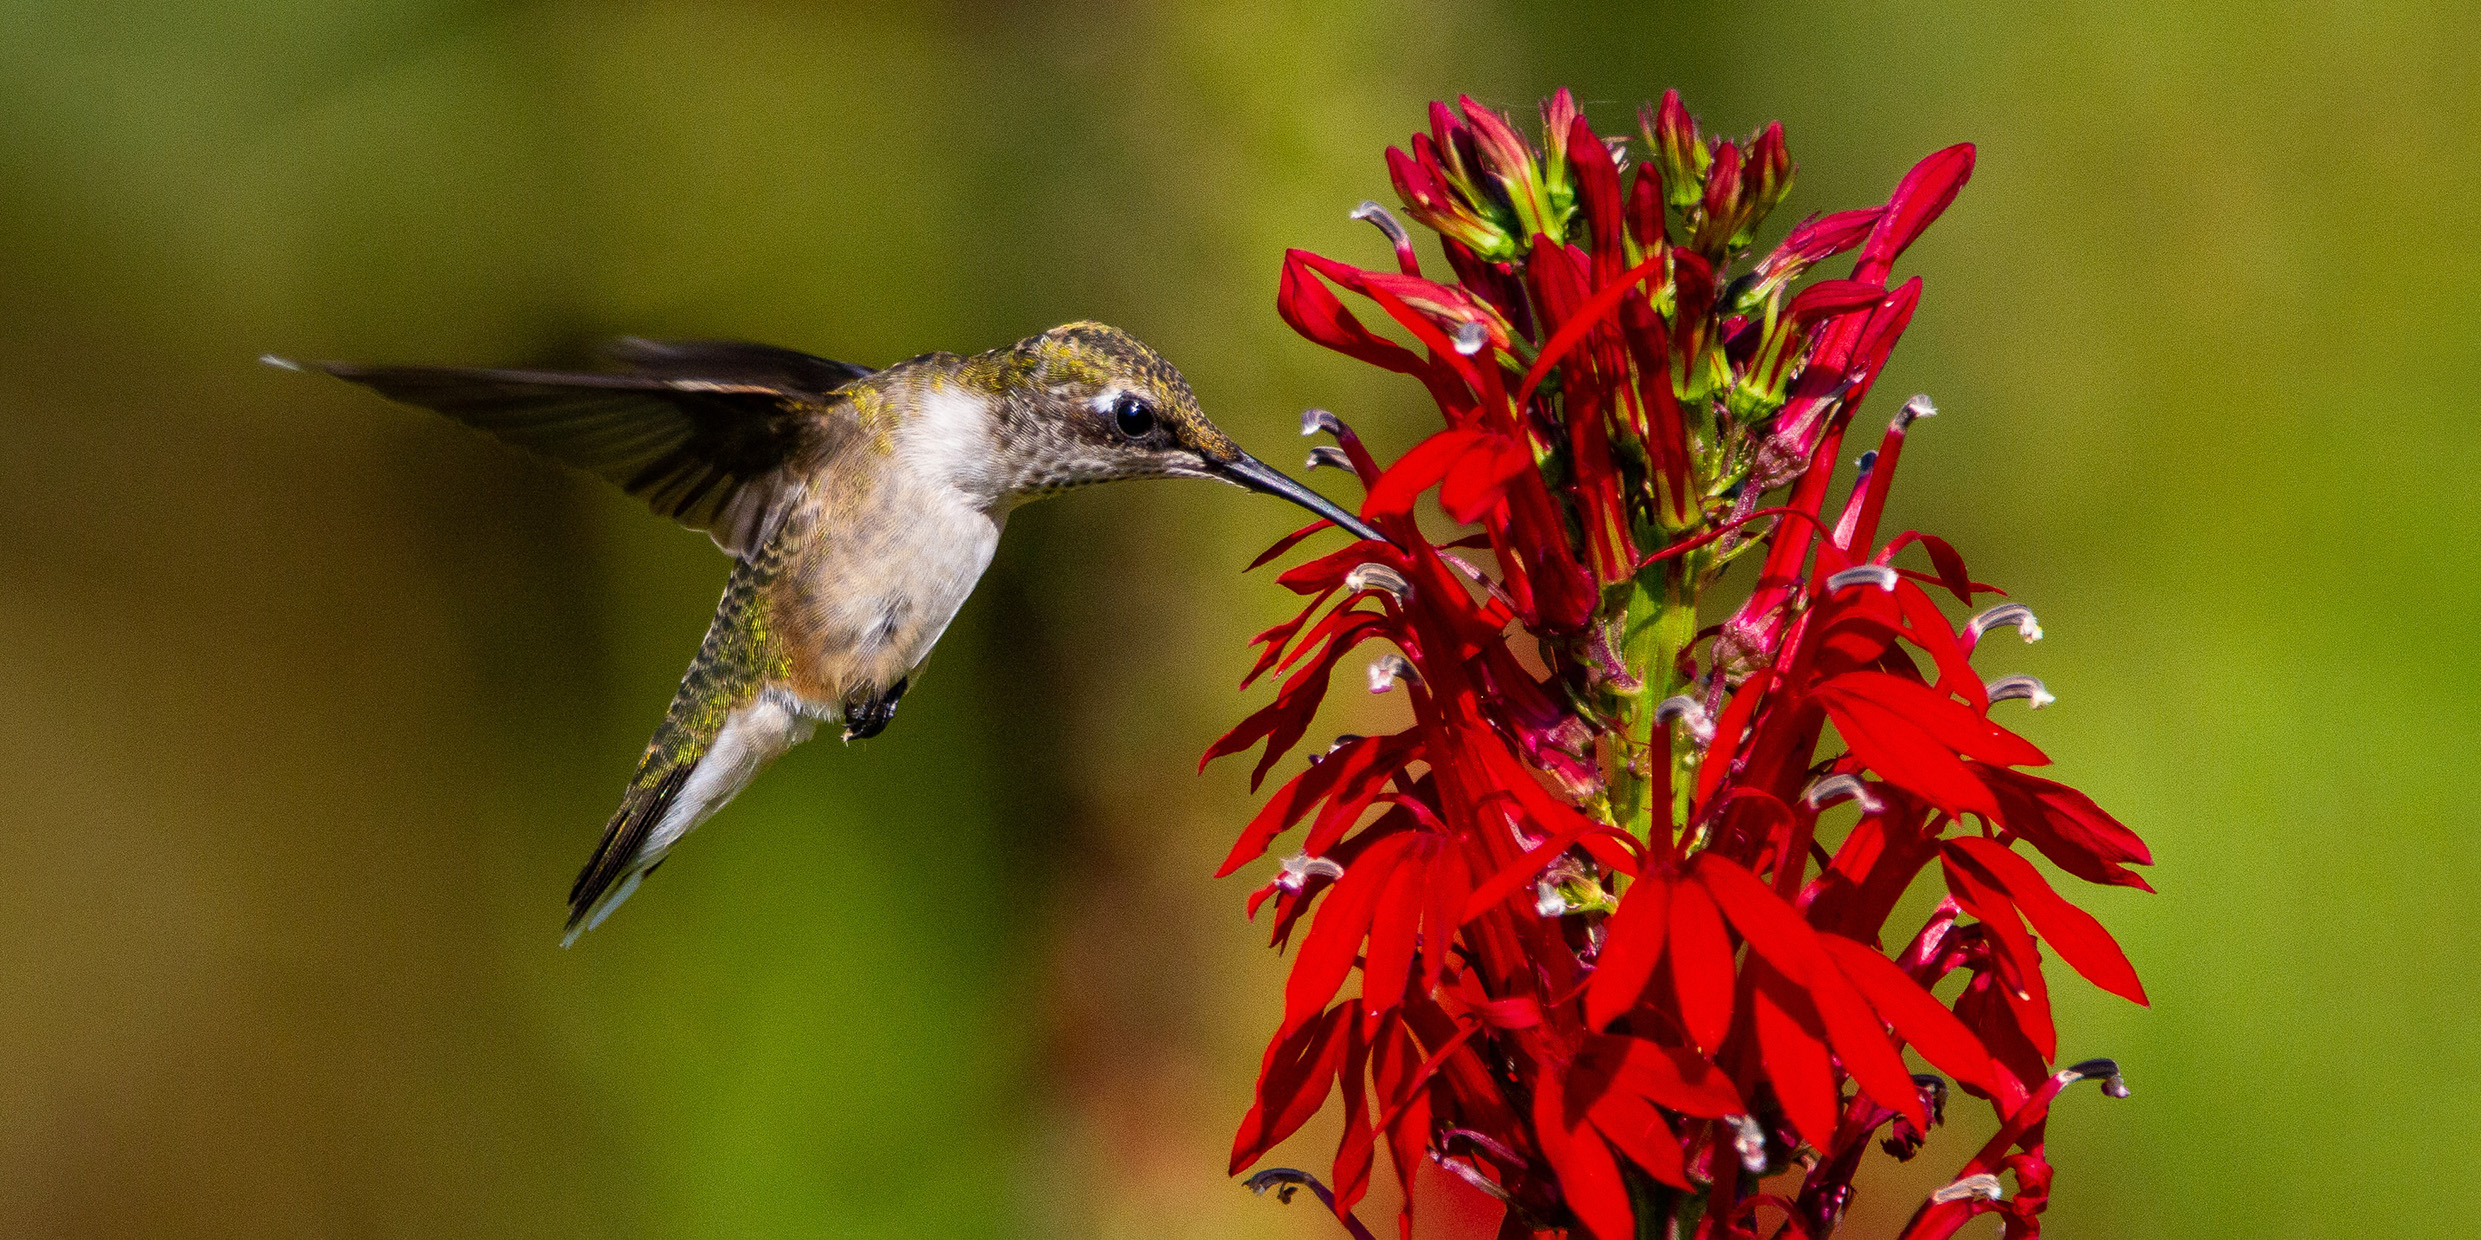 Image of a hummingbird drinking nectar from a cardinal flower